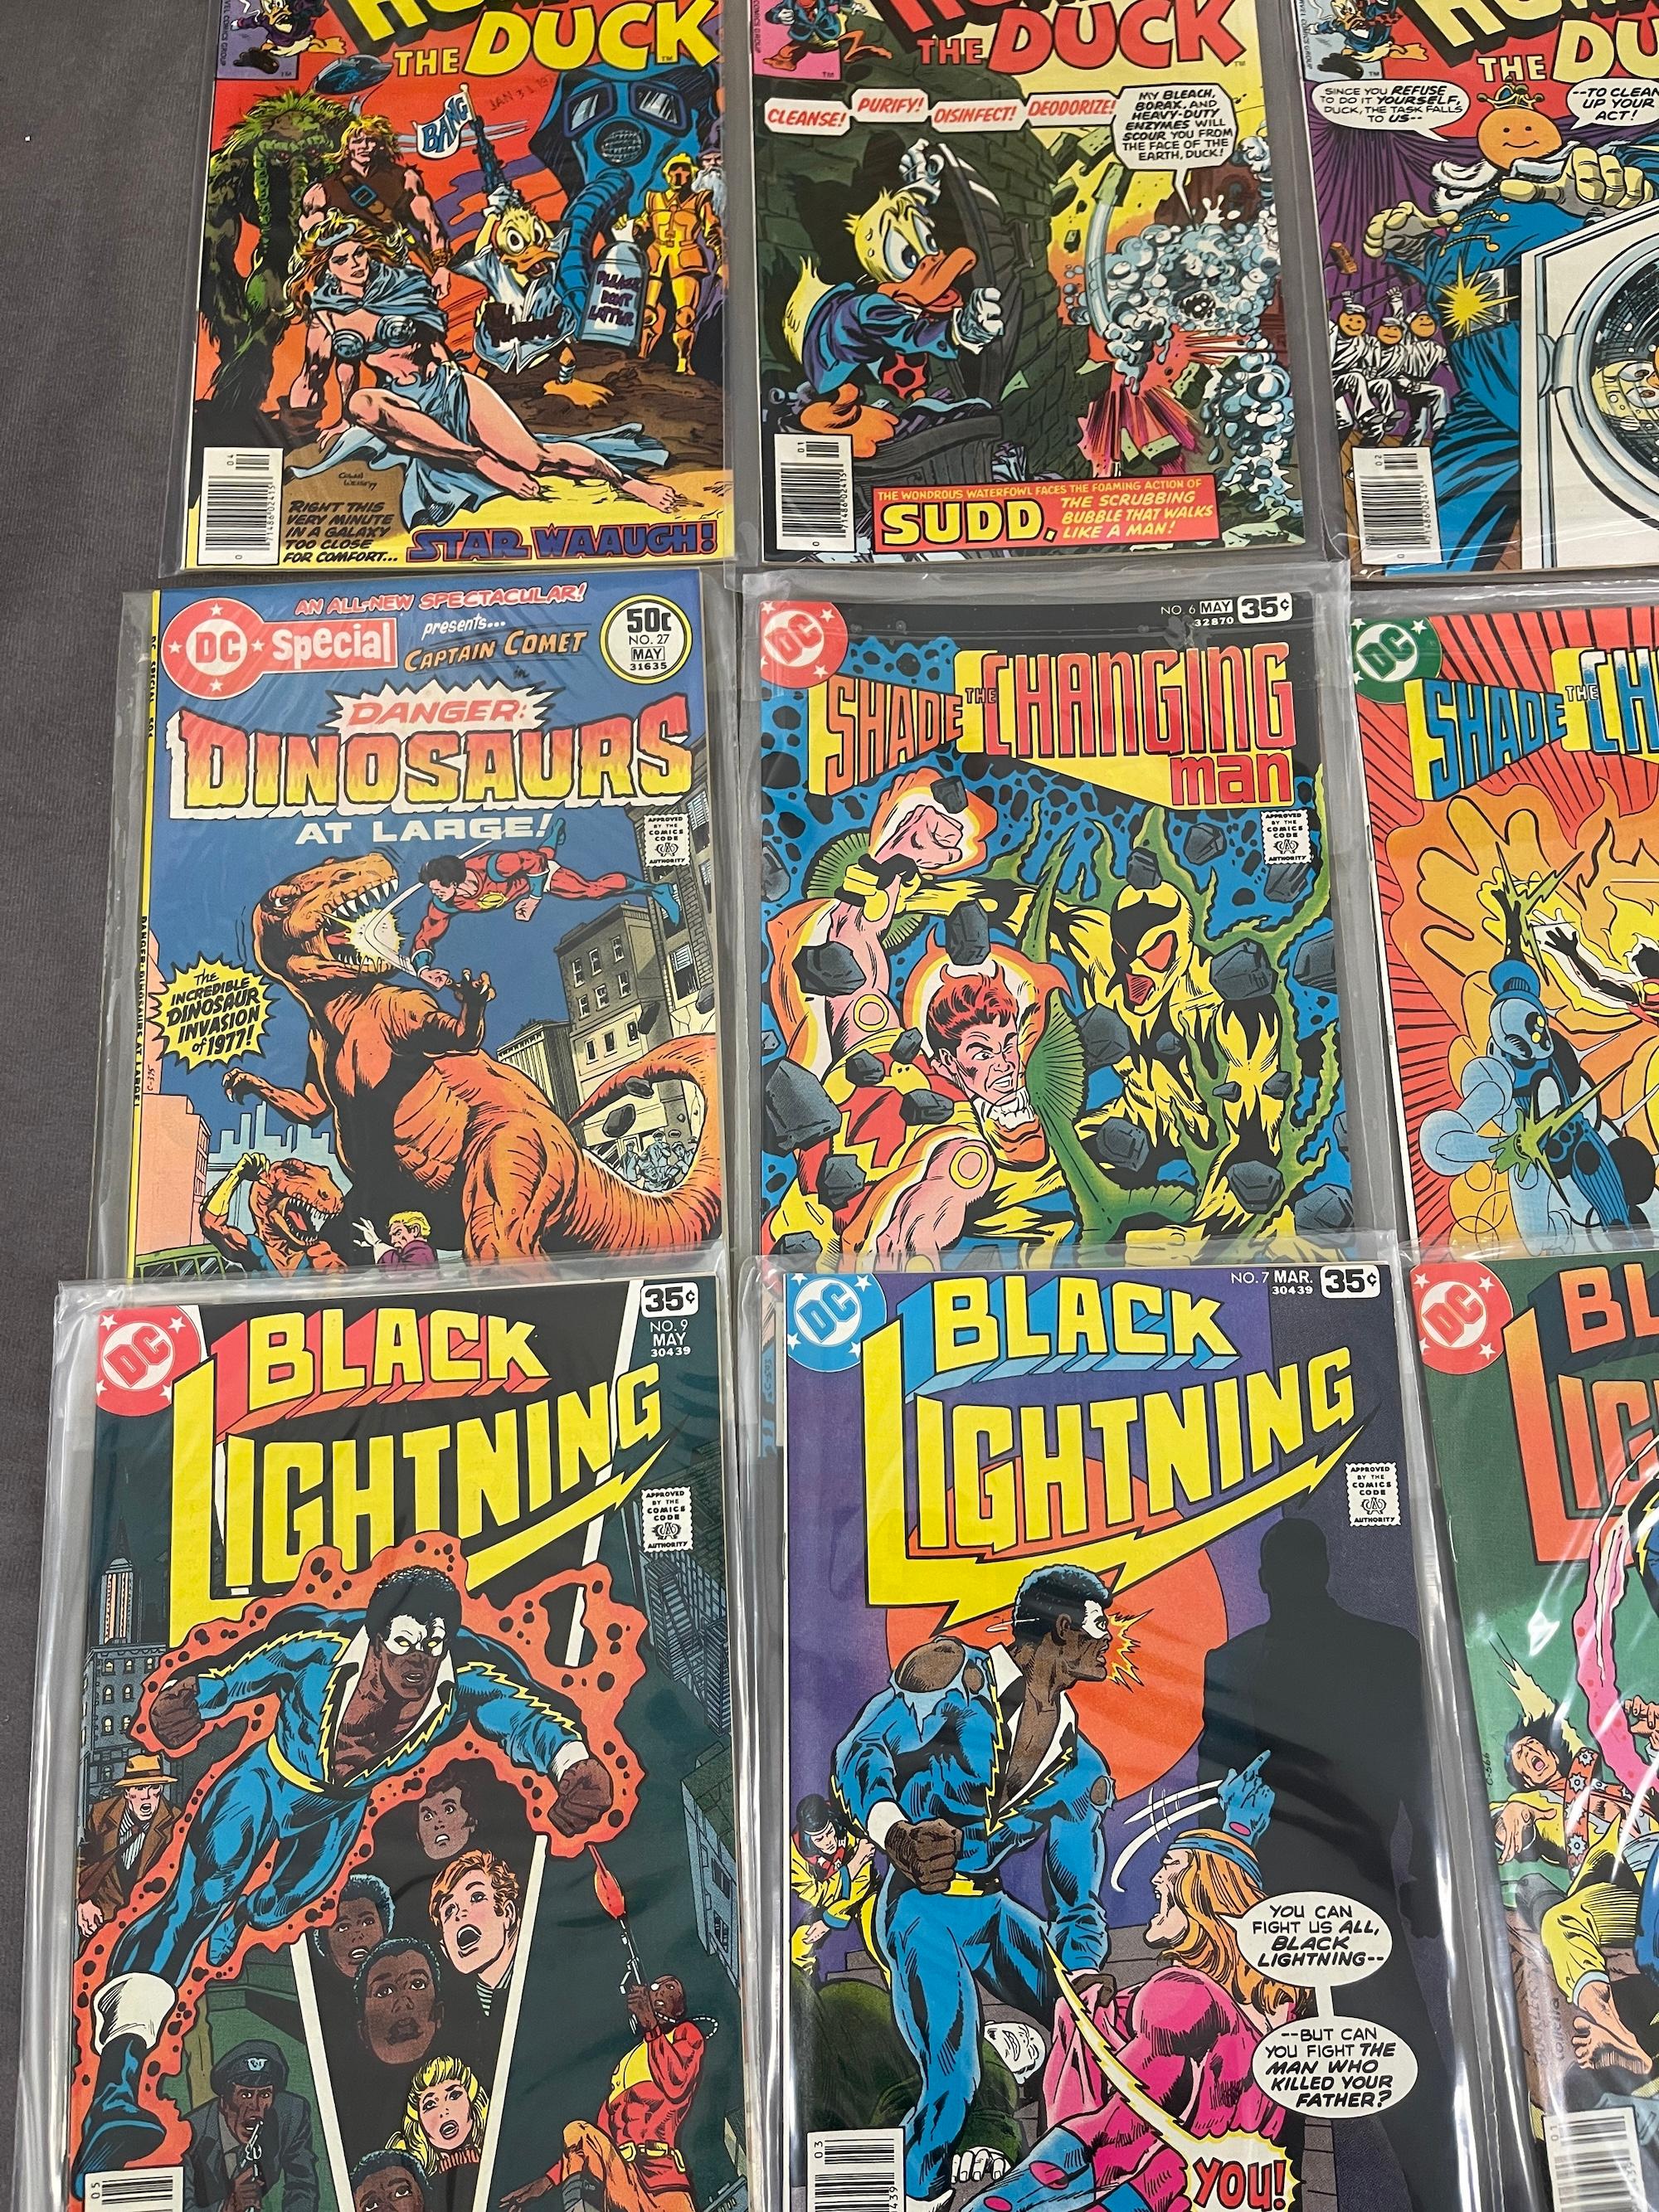 VINTAGE COMIC BOOK COLLECTION HOWARD DUCK LOT 21